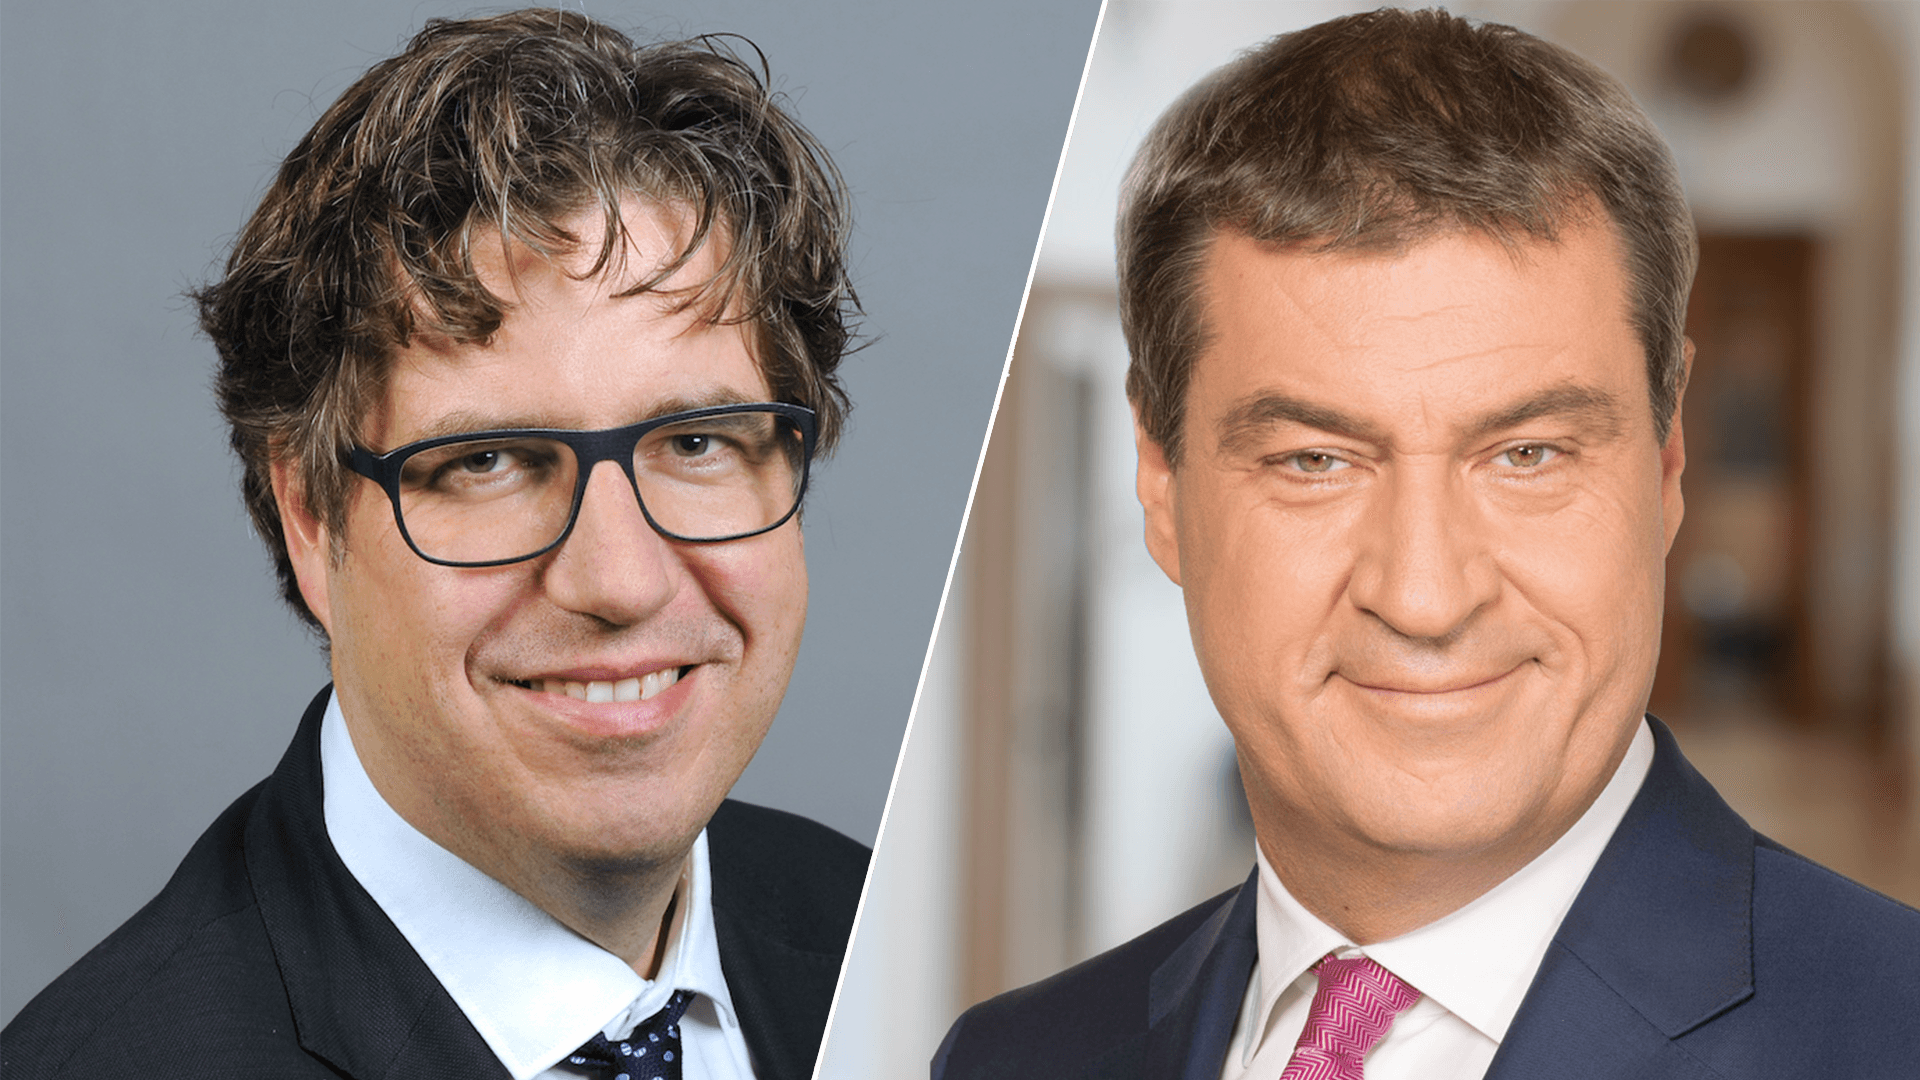 Söder and Kellner to Hold Laudatory Speeches at DCP